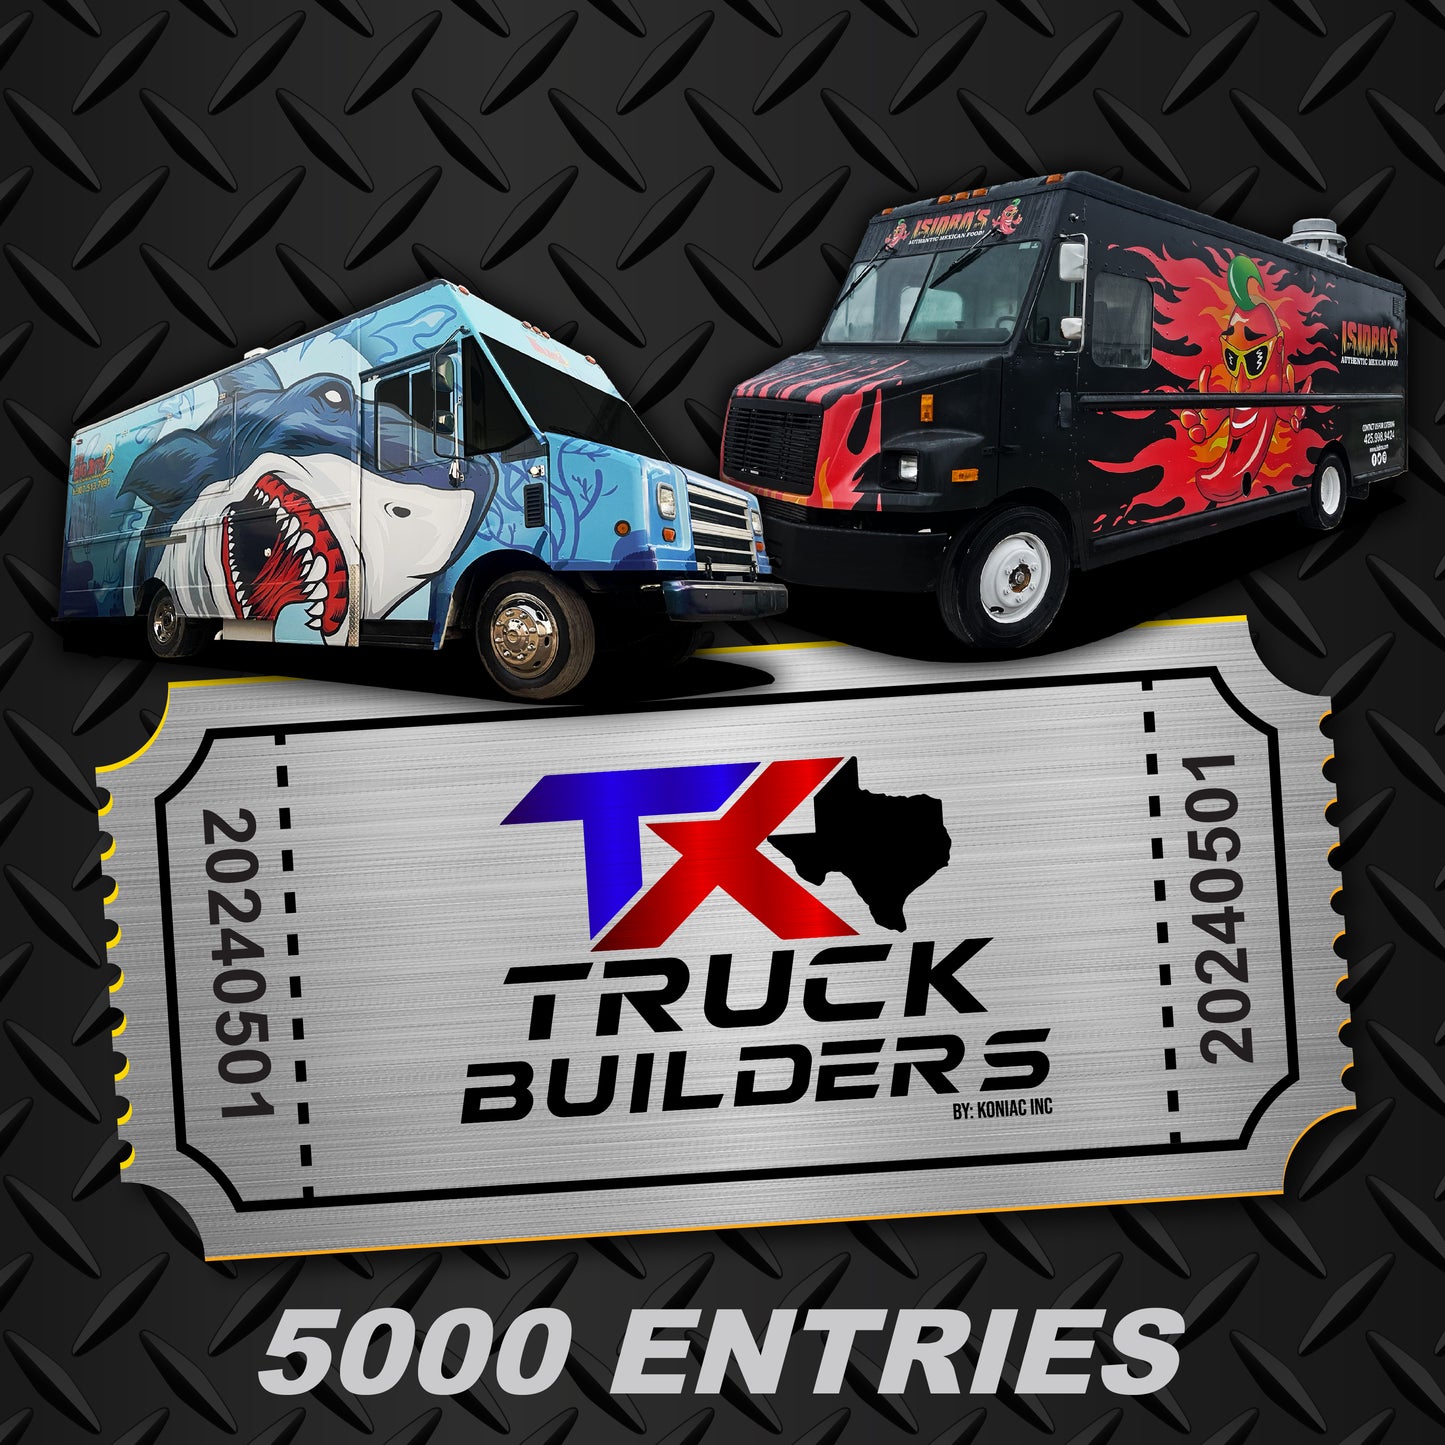 $500 = 5000 ENTRIES FOR A FOOD TRUCK GIVEAWAY